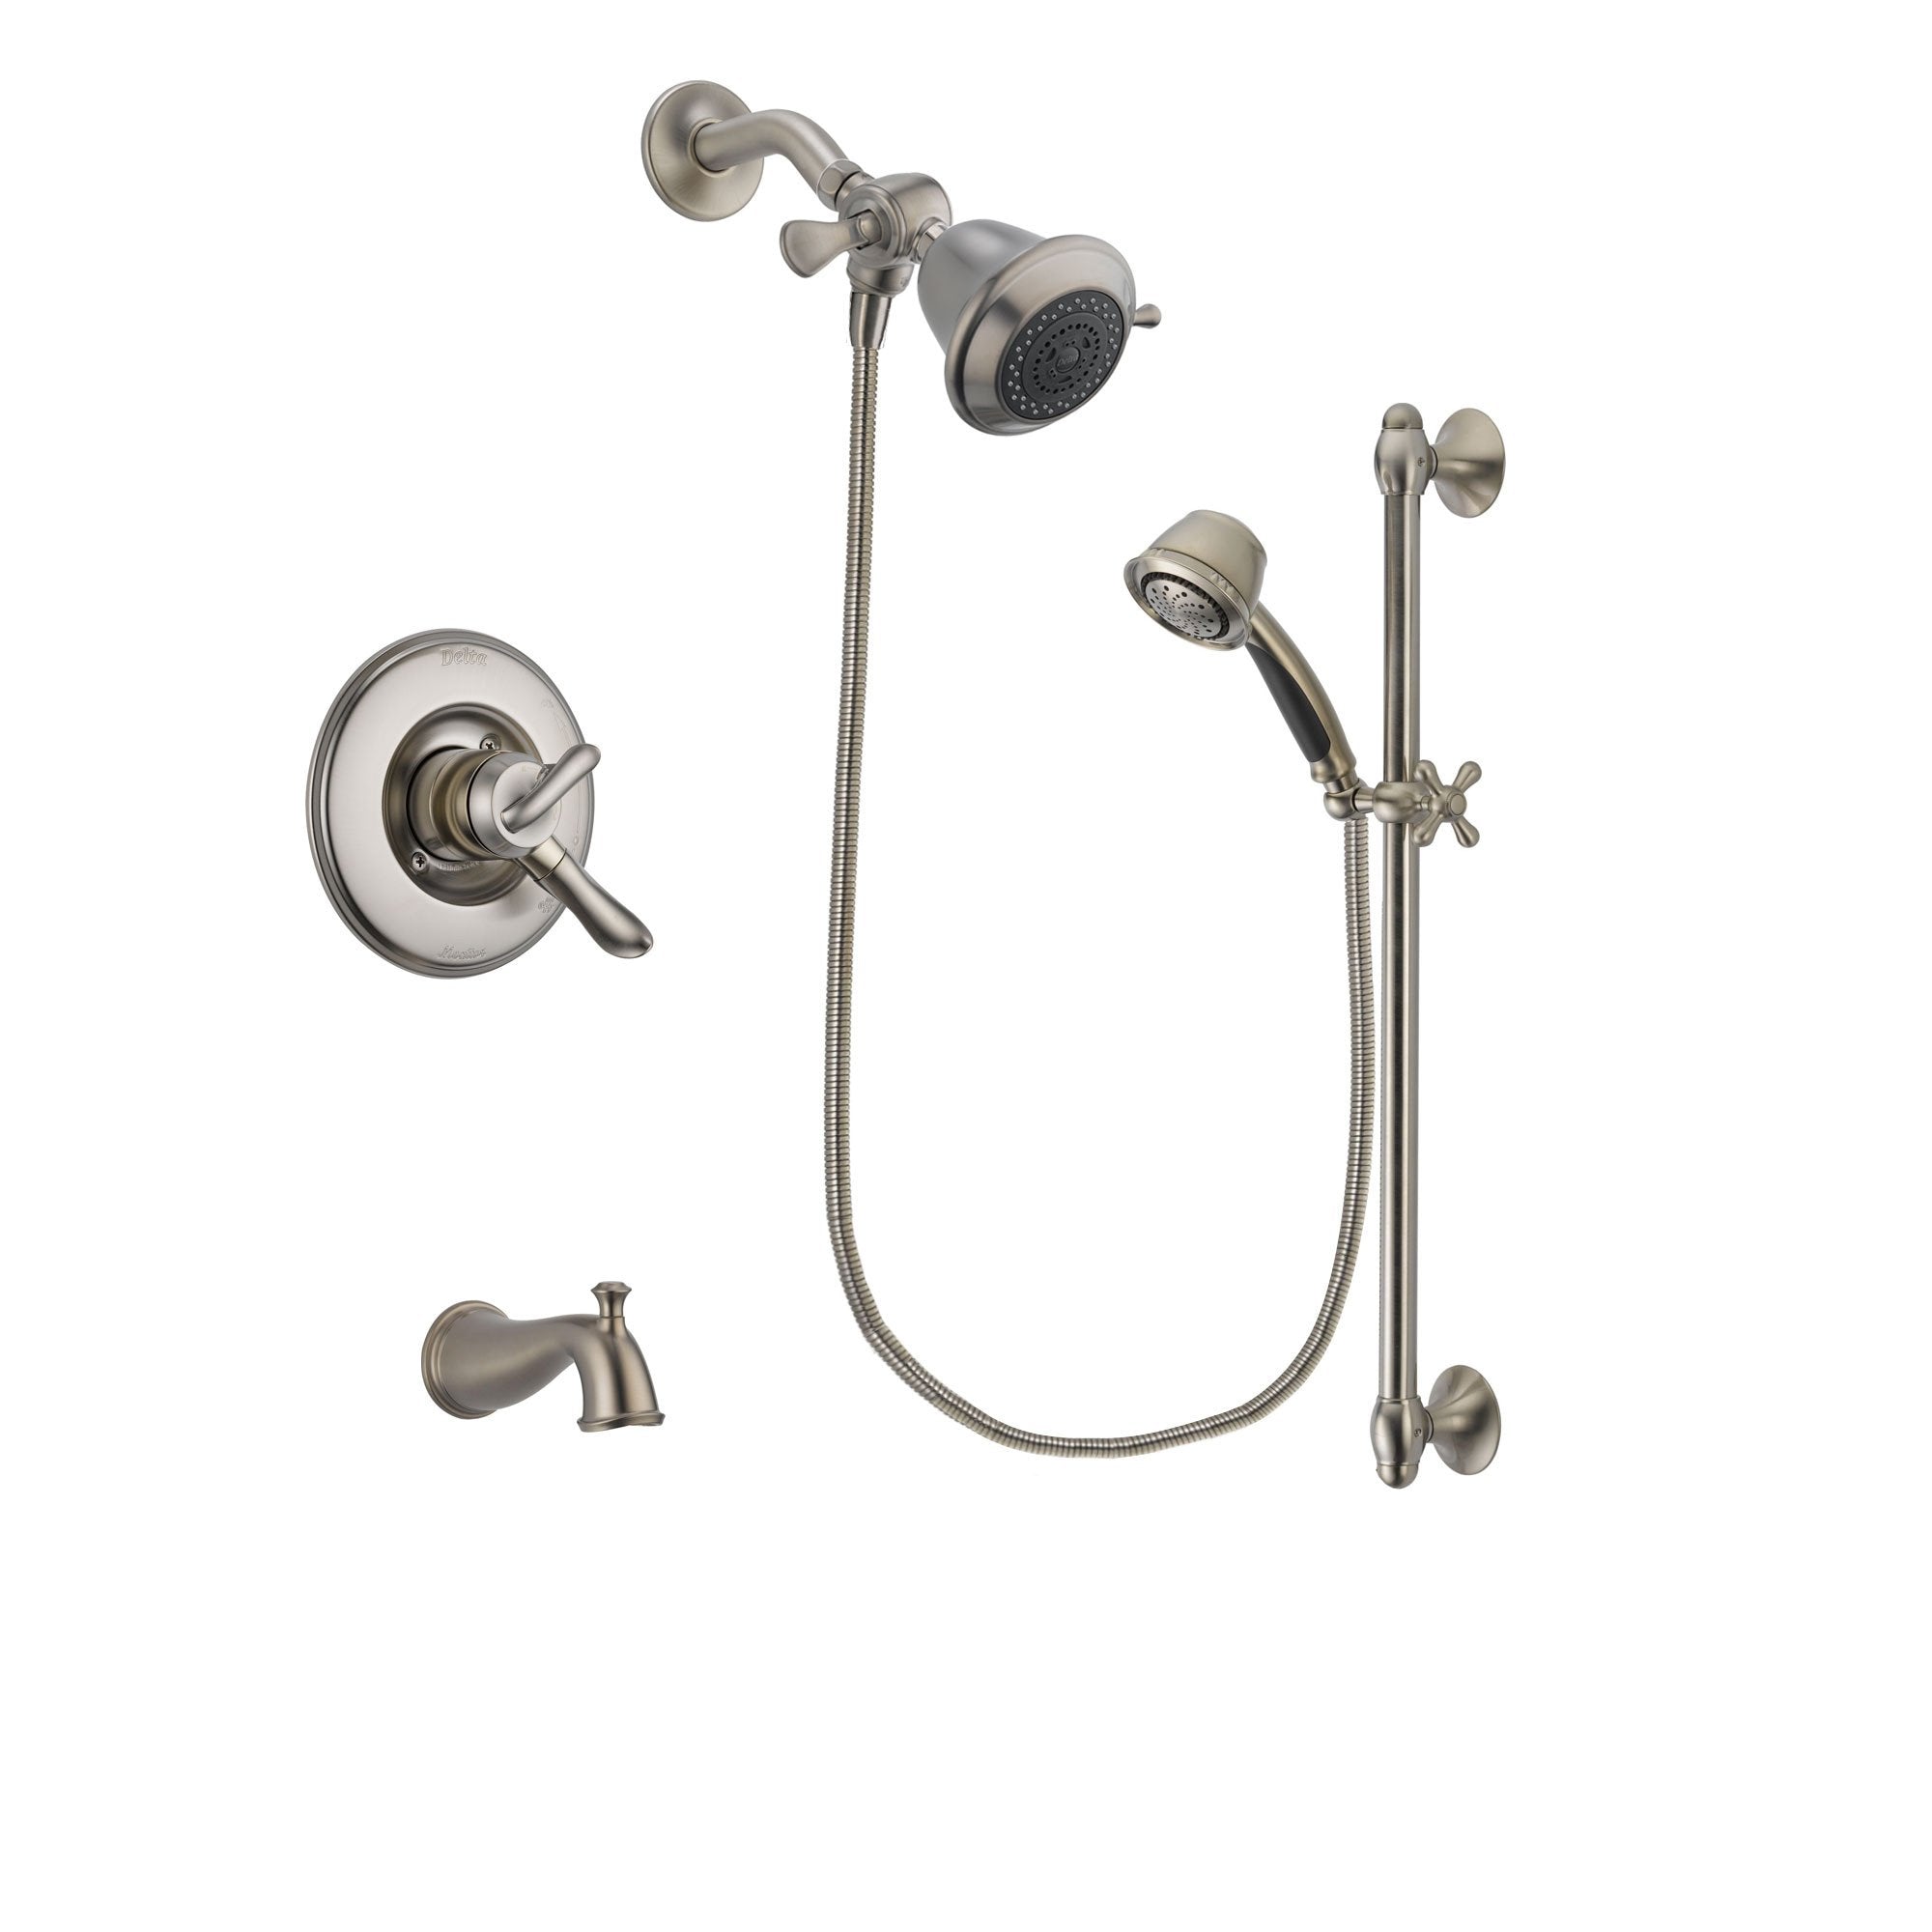 Delta Linden Stainless Steel Finish Dual Control Tub and Shower Faucet System Package with Shower Head and 5-Spray Personal Handshower with Slide Bar Includes Rough-in Valve and Tub Spout DSP1271V